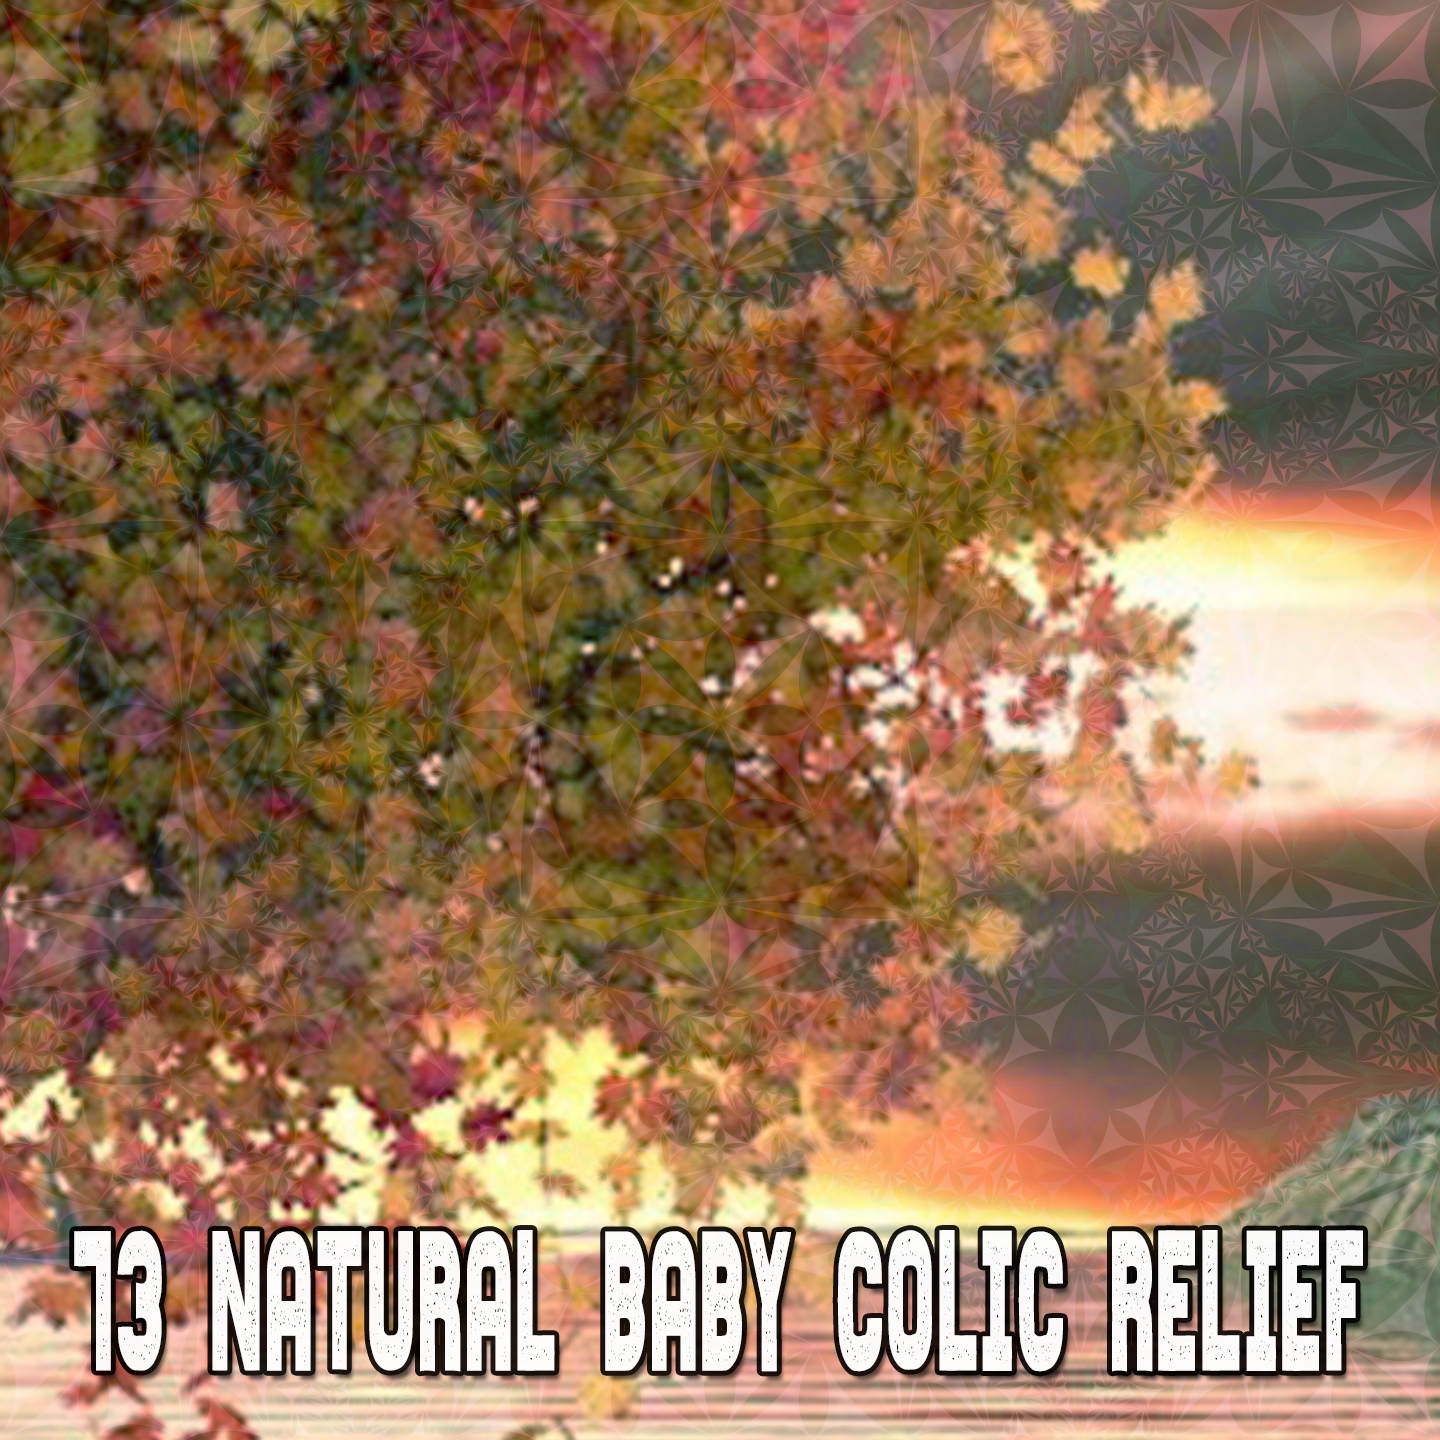 73 Natural Baby Colic Relief